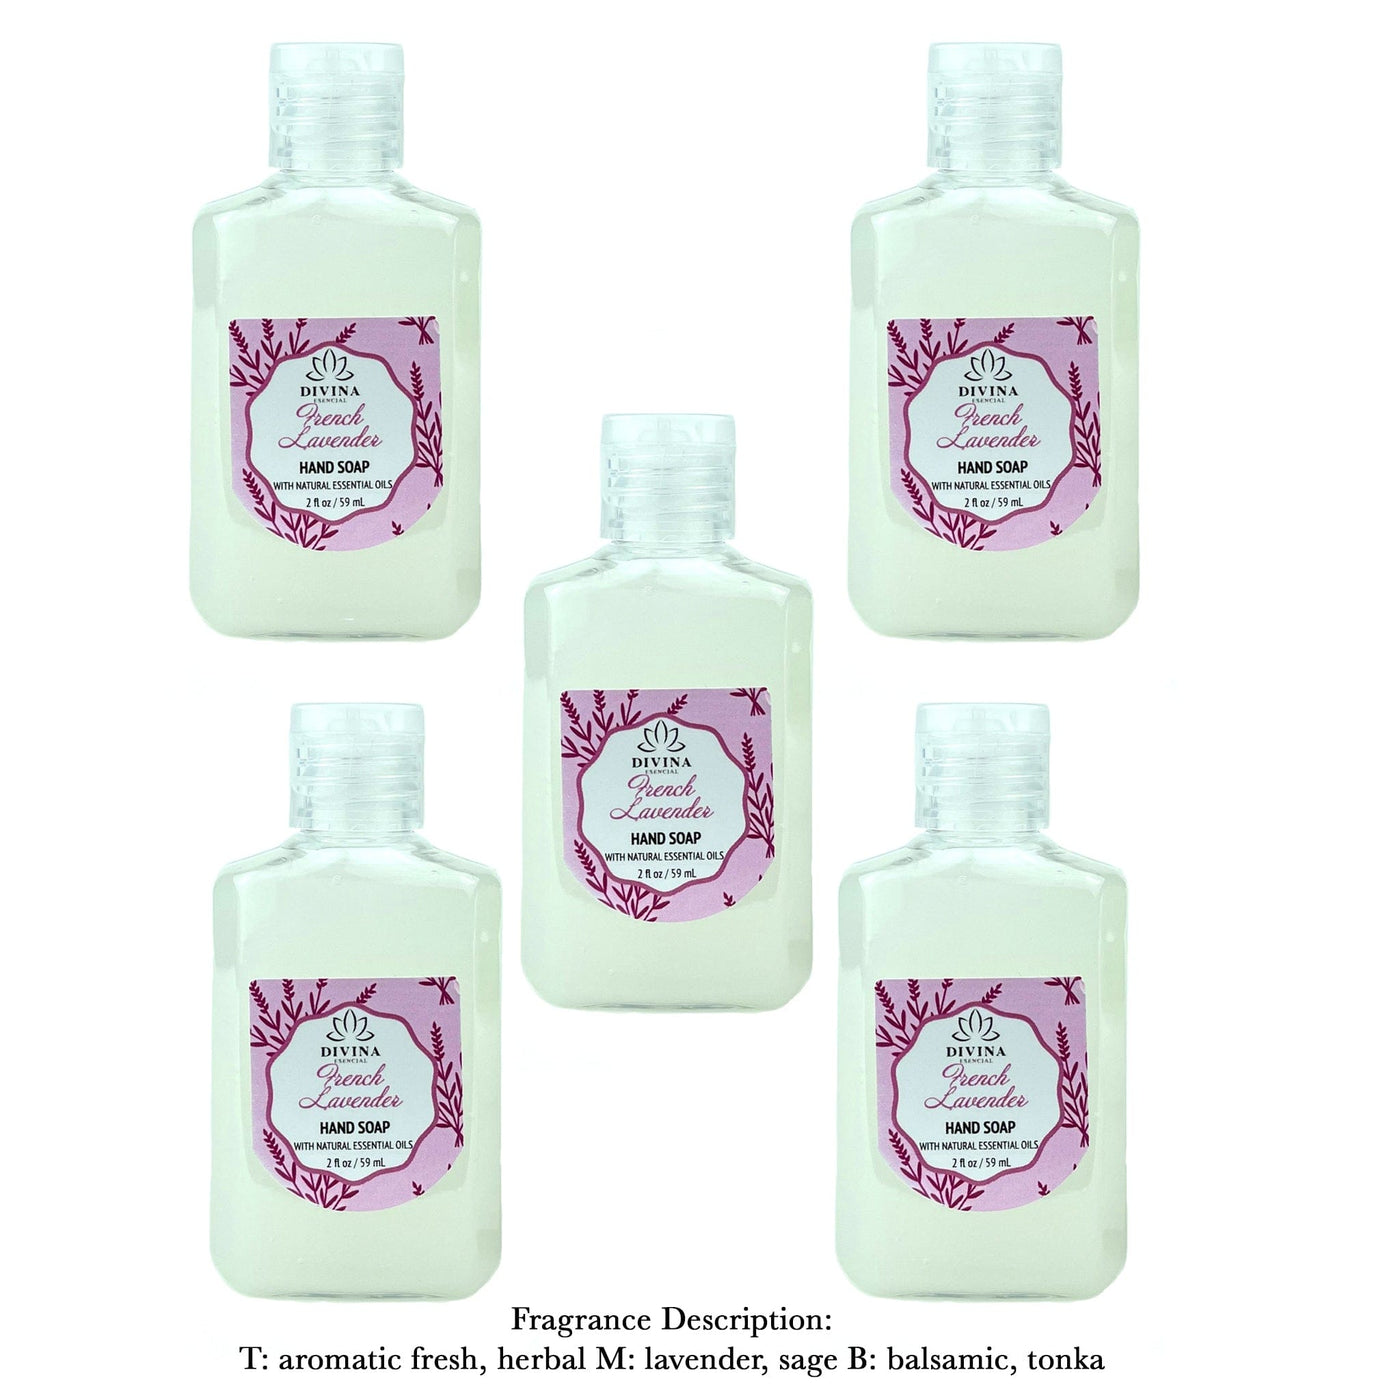 French Lavender PocketBac Hand Foaming Soap, 5-Pack